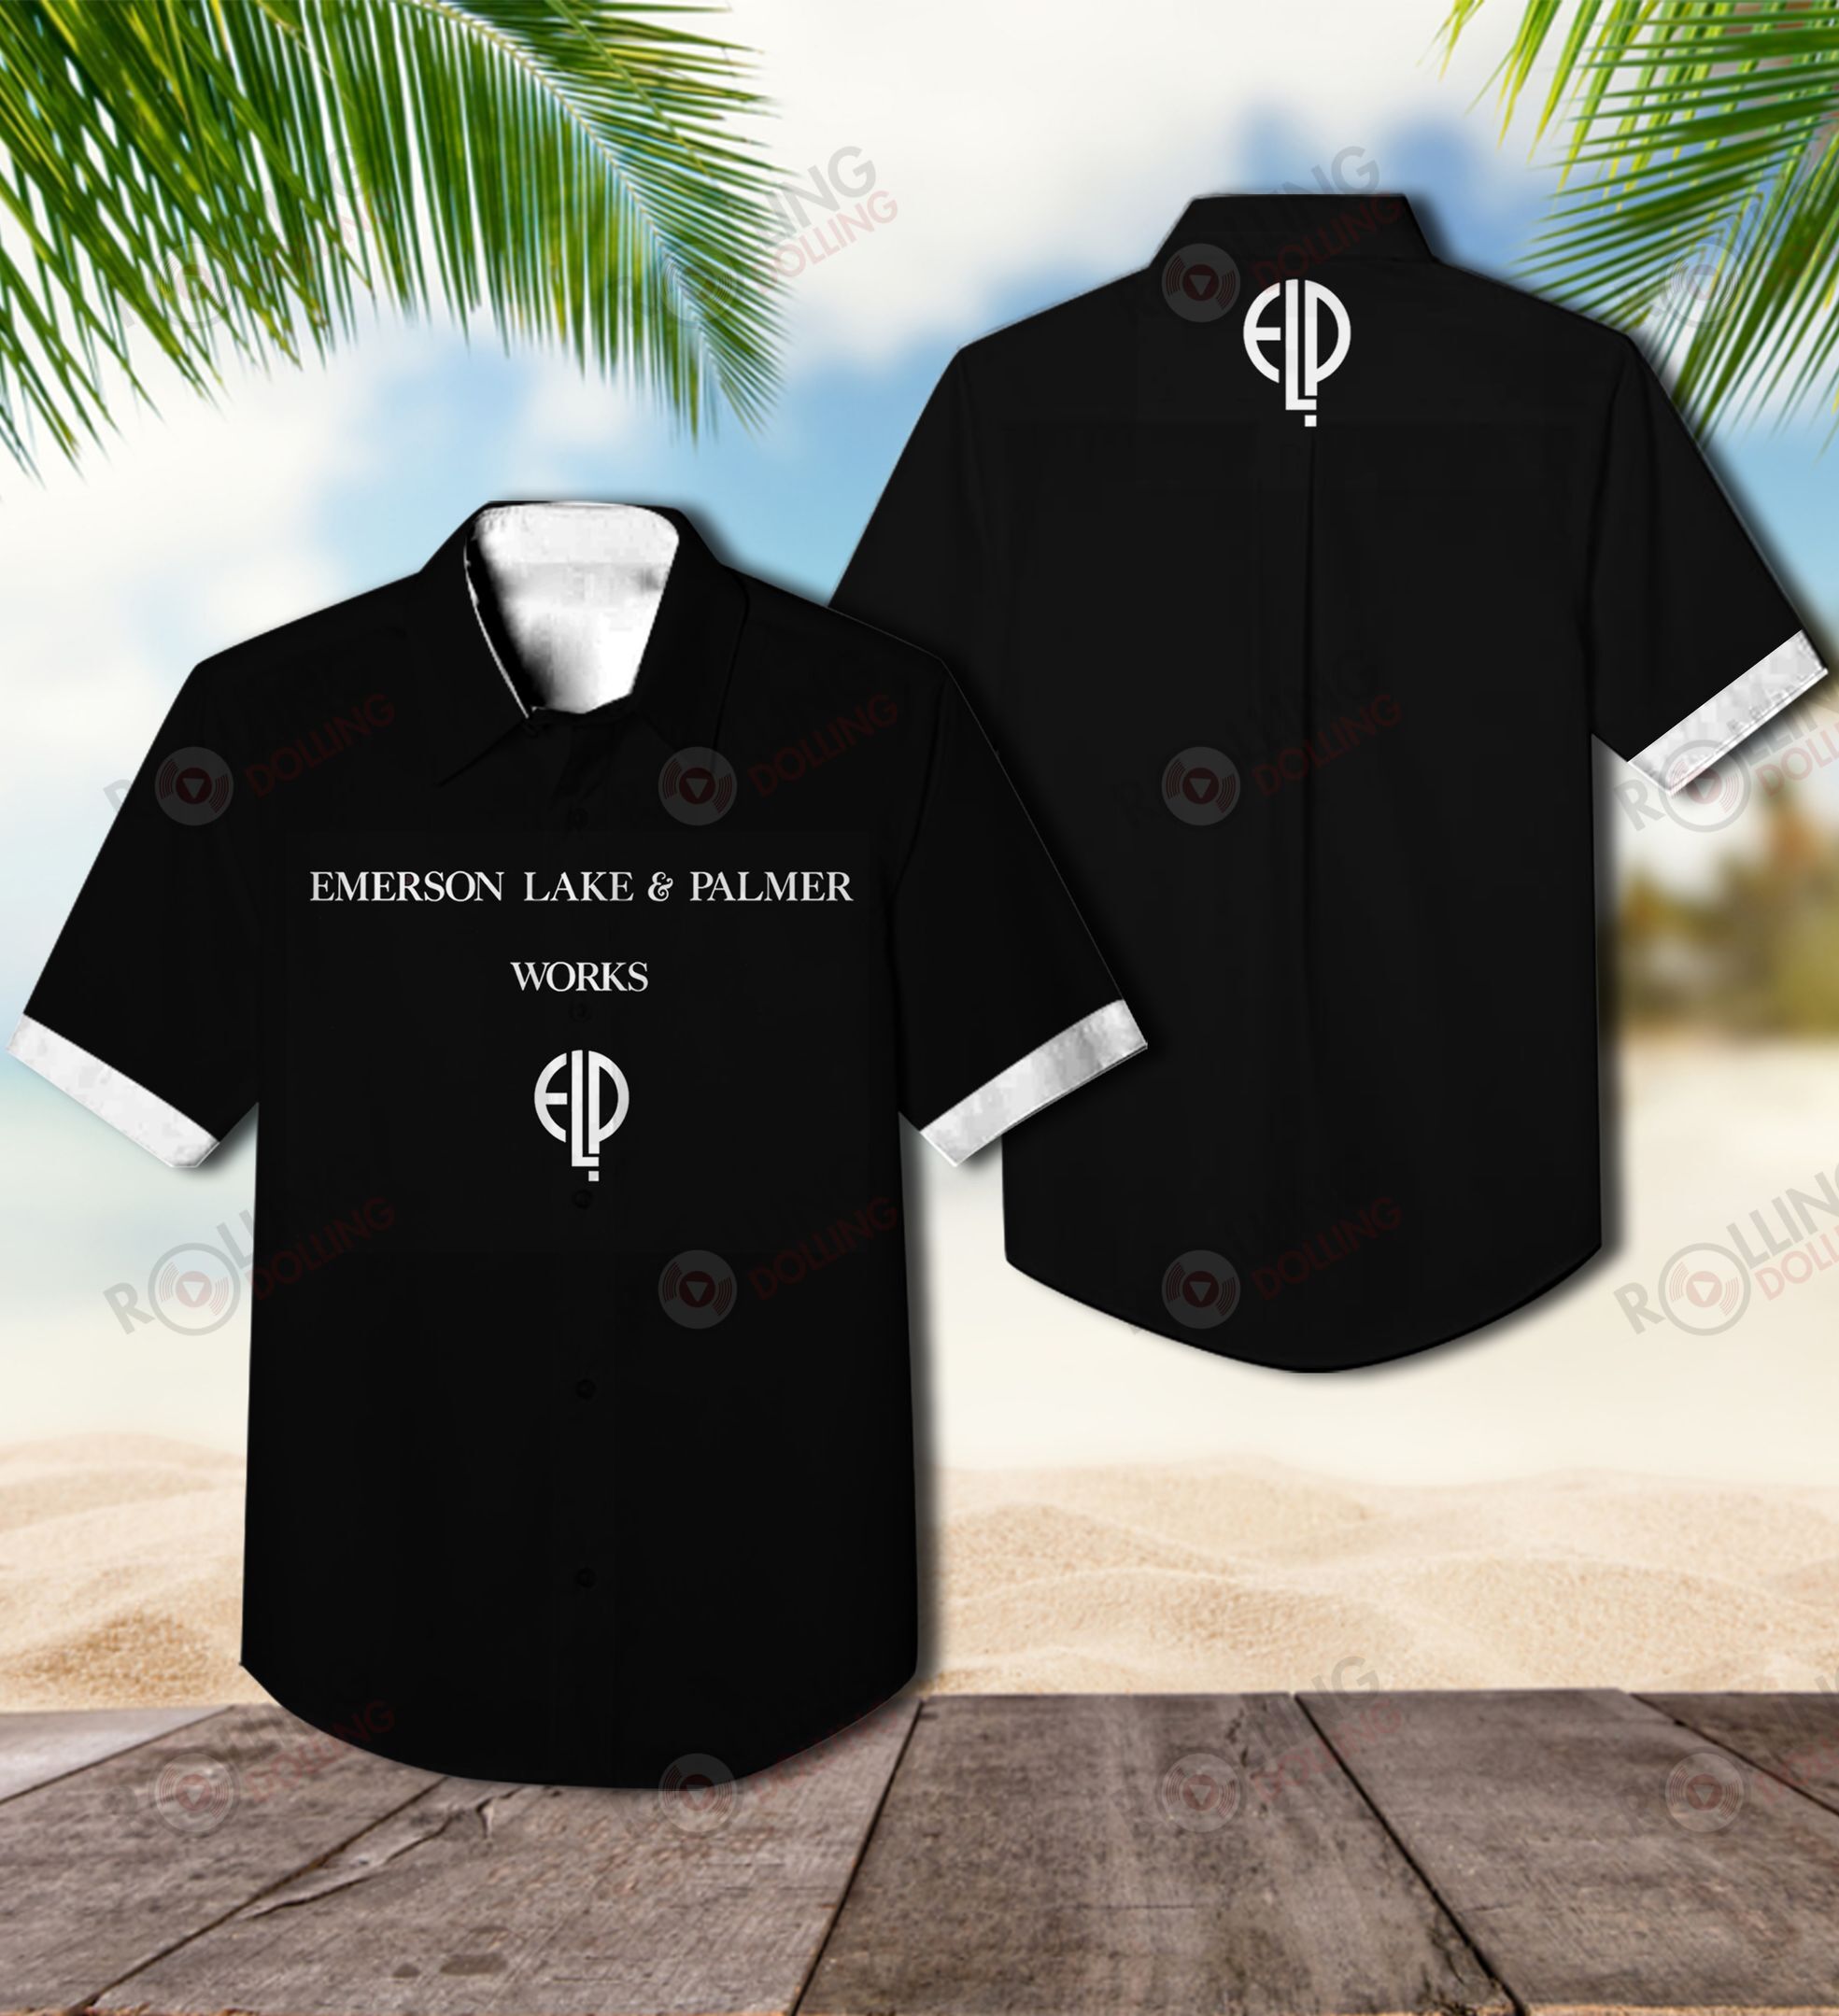 The Hawaiian Shirt is a popular shirt that is worn by Rock band fans 68